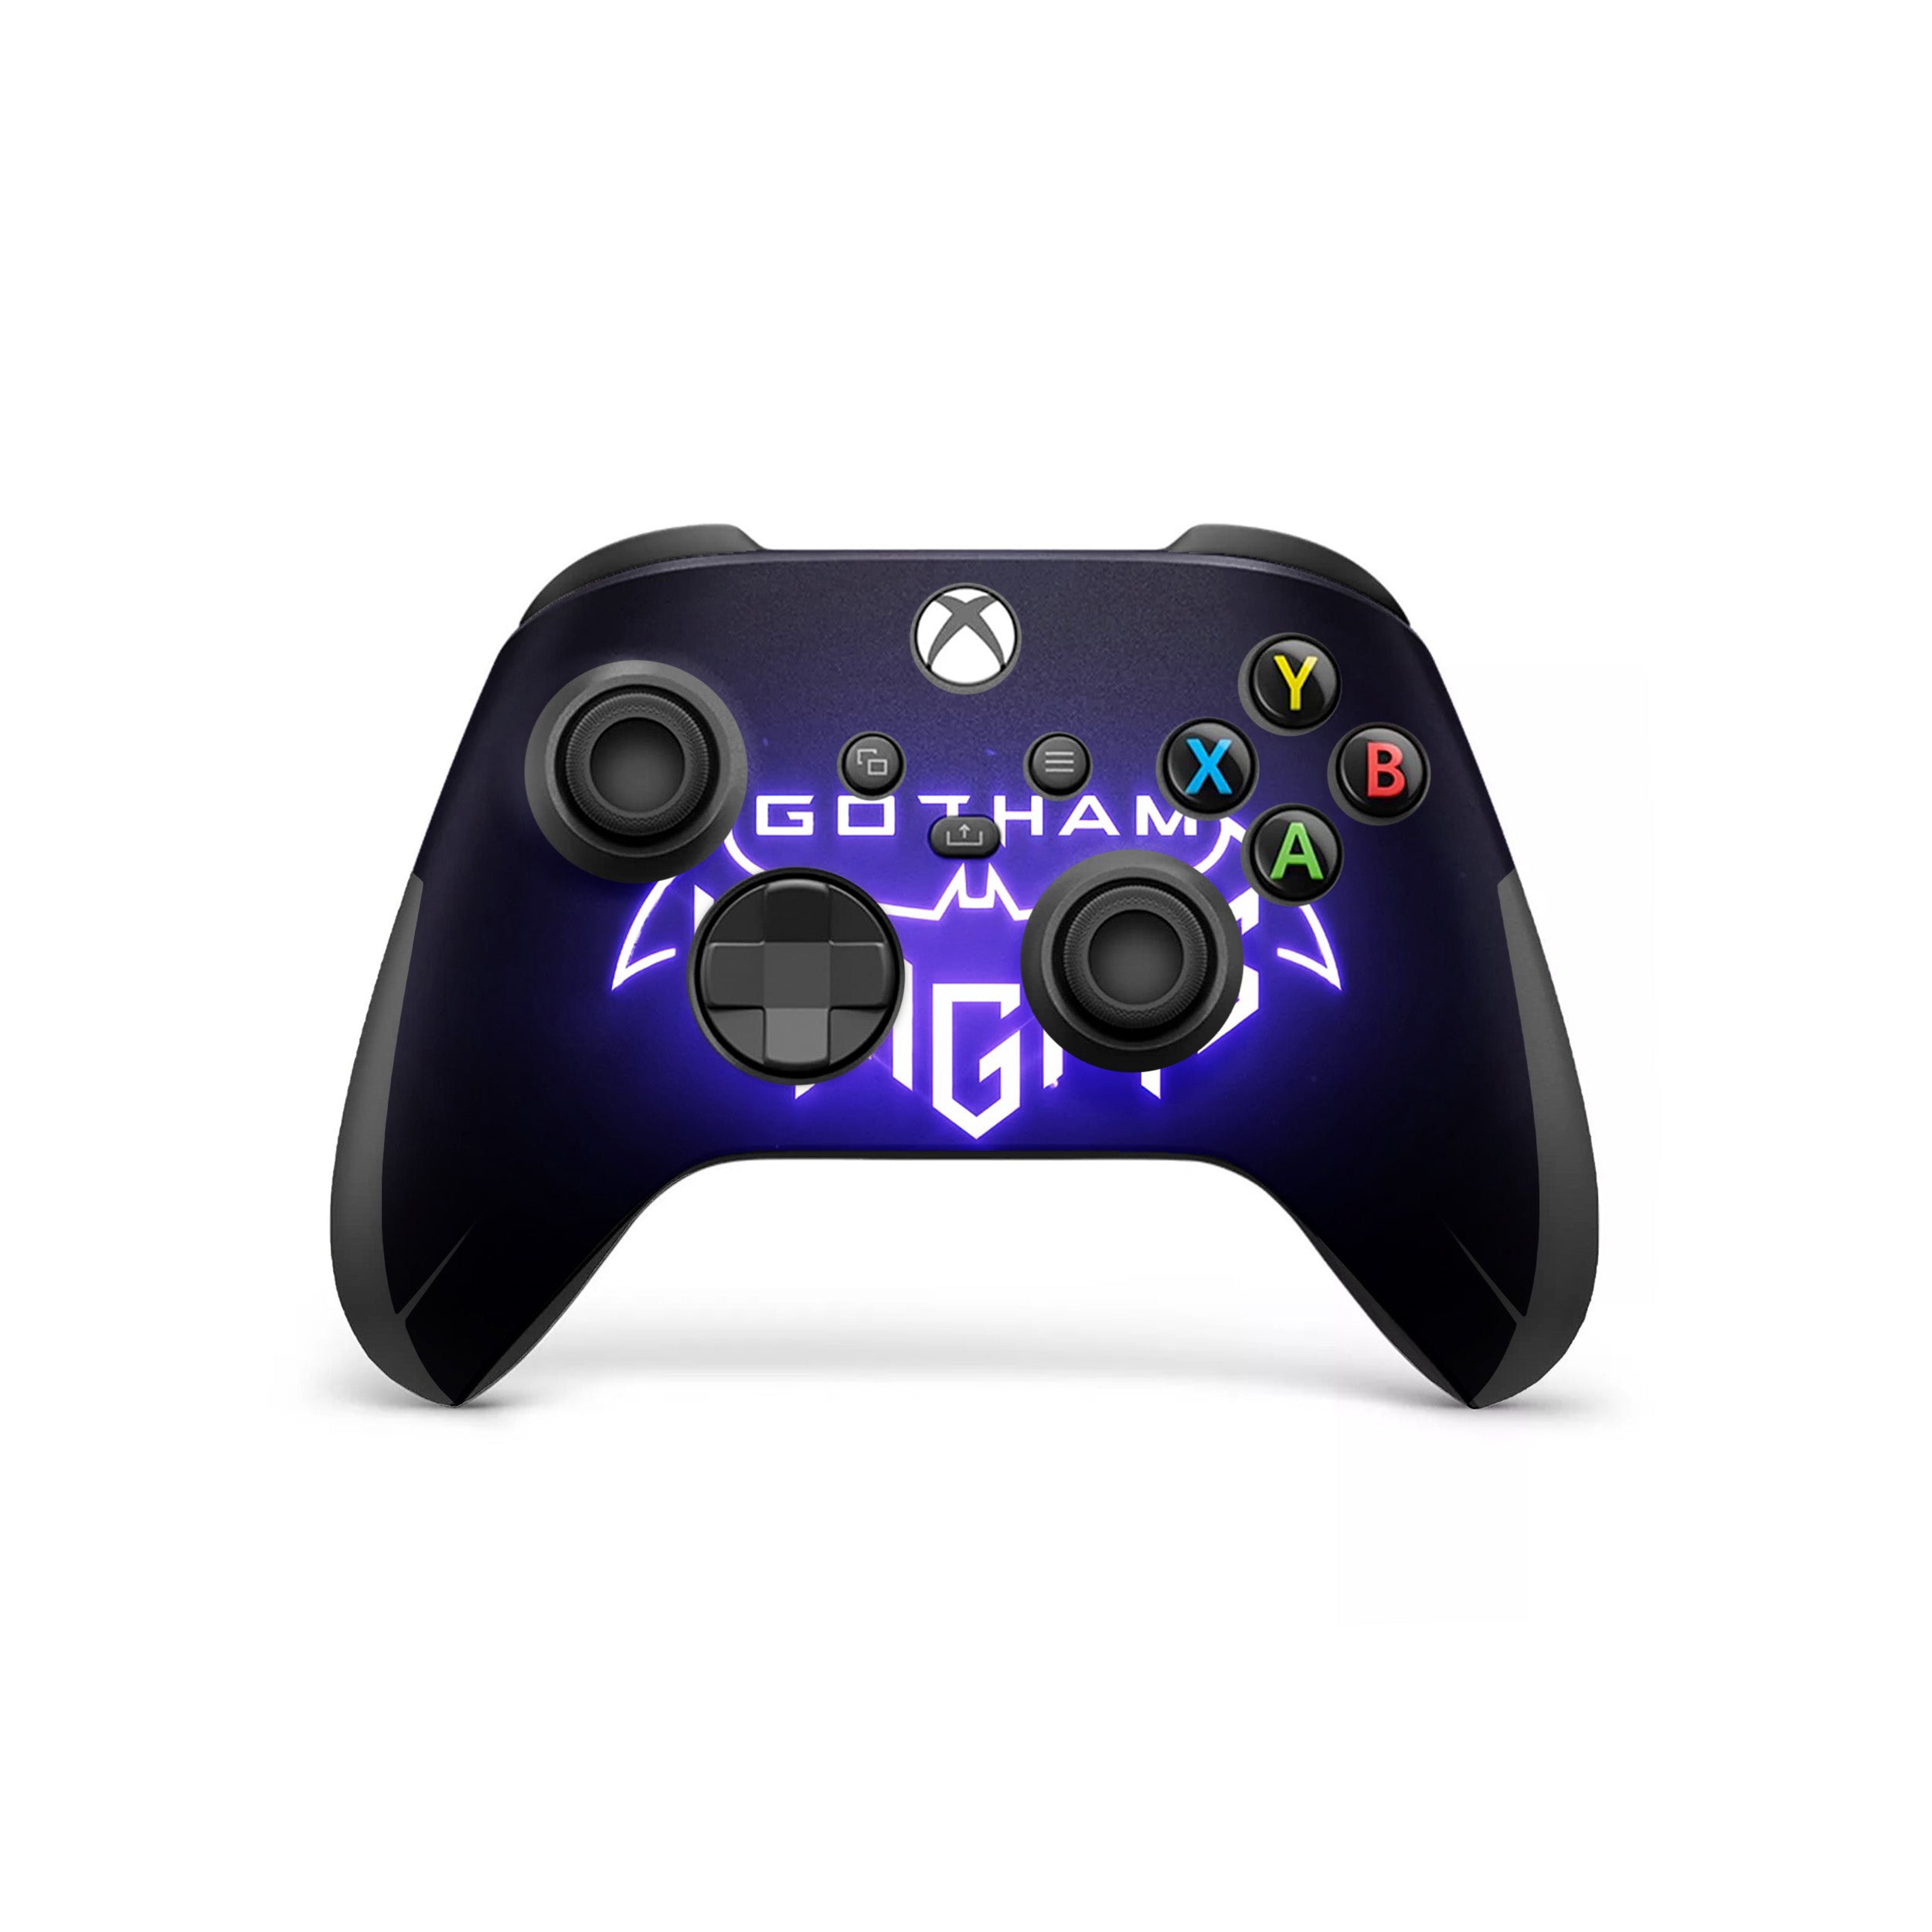 A video game skin featuring a DC Comics Gotham Knights design for the Xbox Wireless Controller.